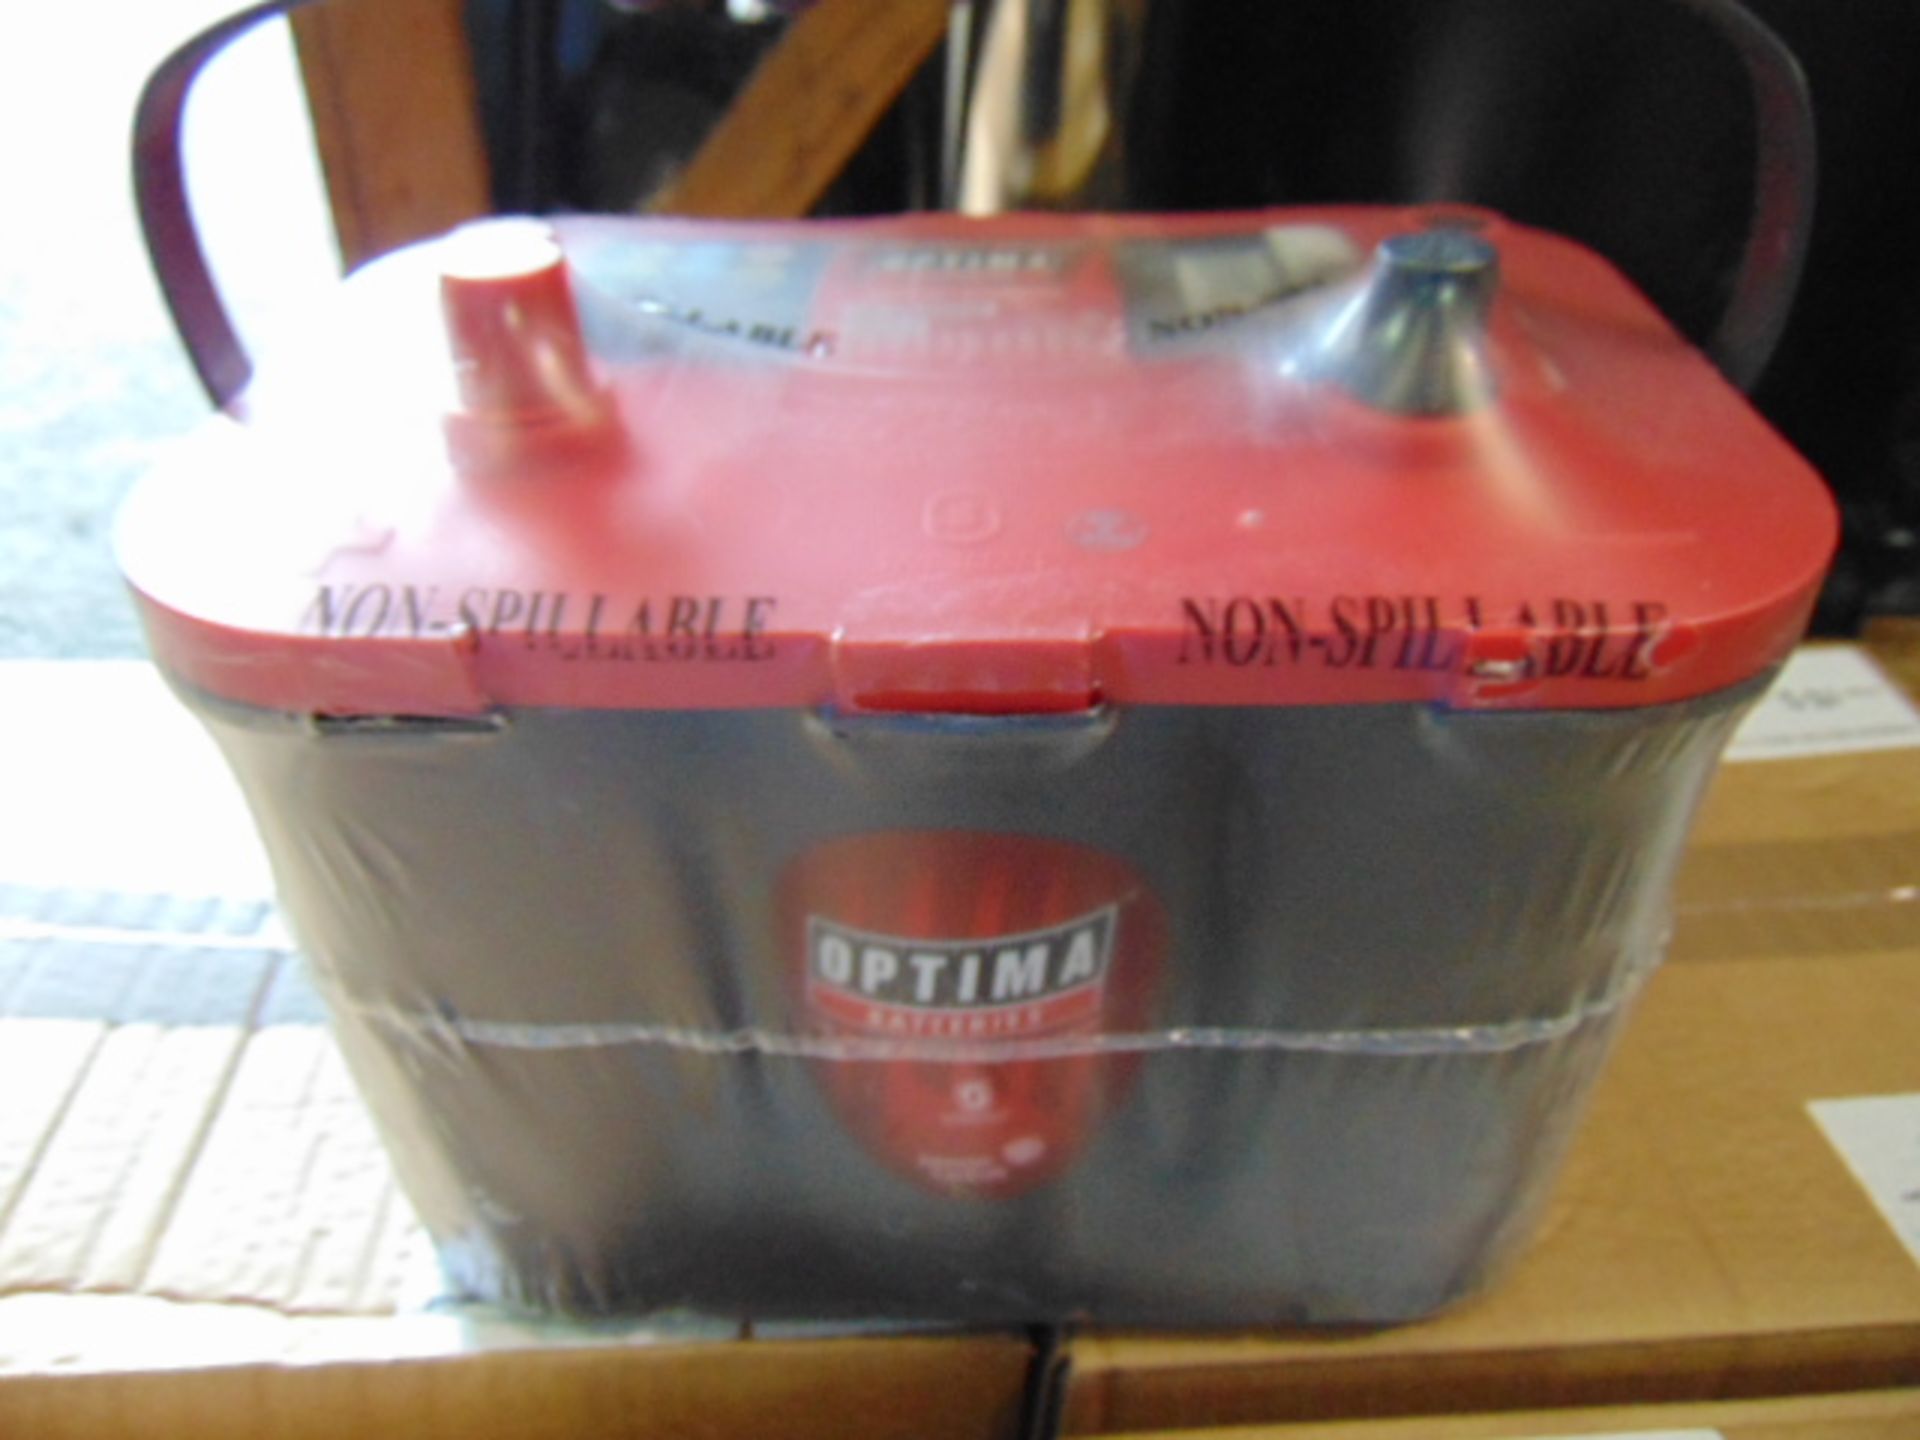 4 x Unissued RTS 4.2 Optima Red Top 12v Starting Batteries – (8002-250) RTS4.2 AGM - Image 3 of 4